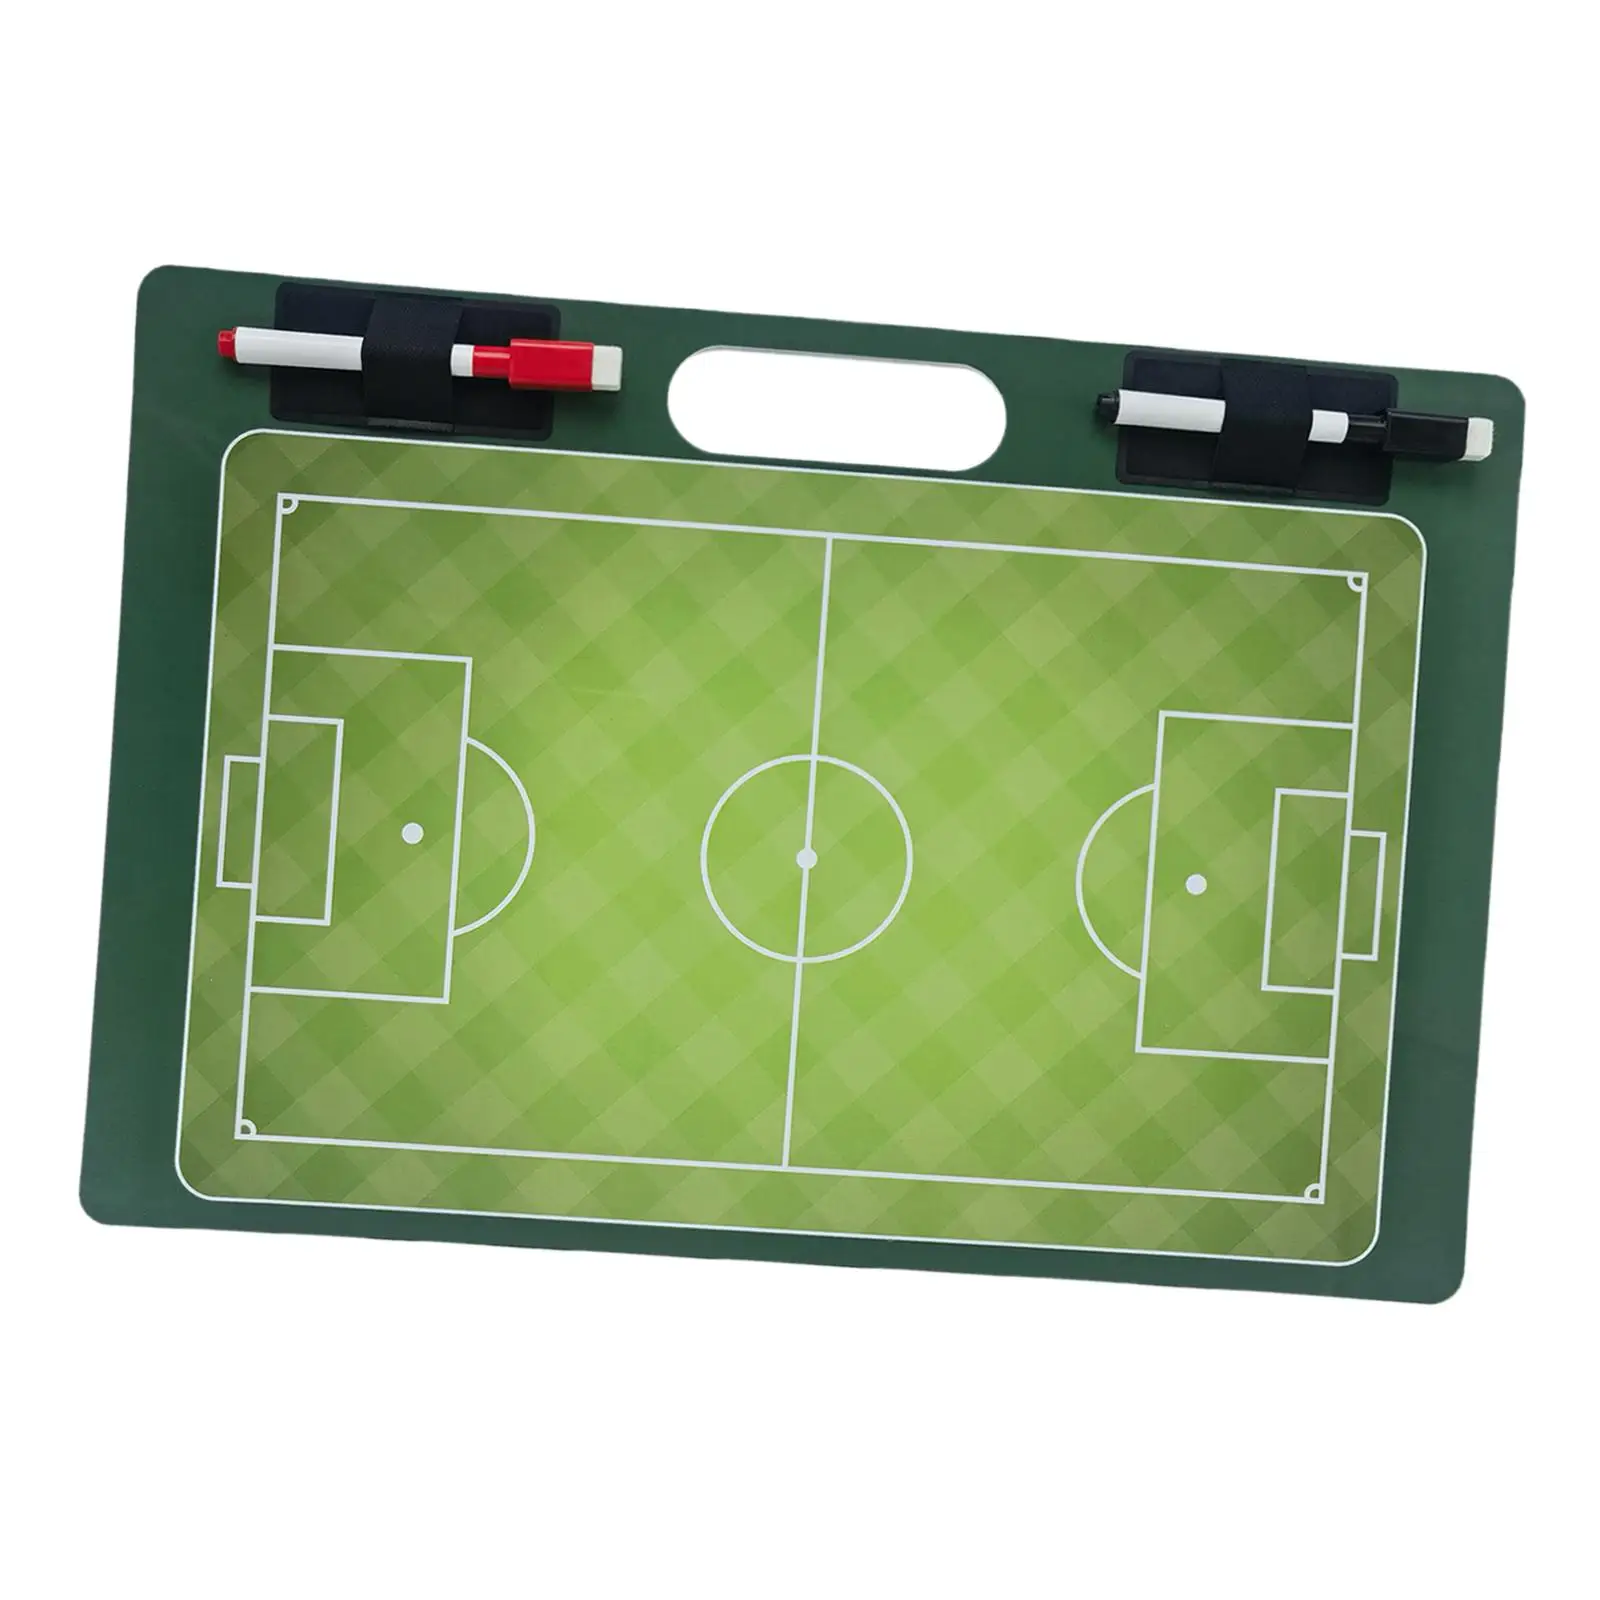 

Football Coaching Board Trainer Aid Marker Pen Marker Board Coaches Clipboard Soccer for Practice Coach Strategy Plan Training